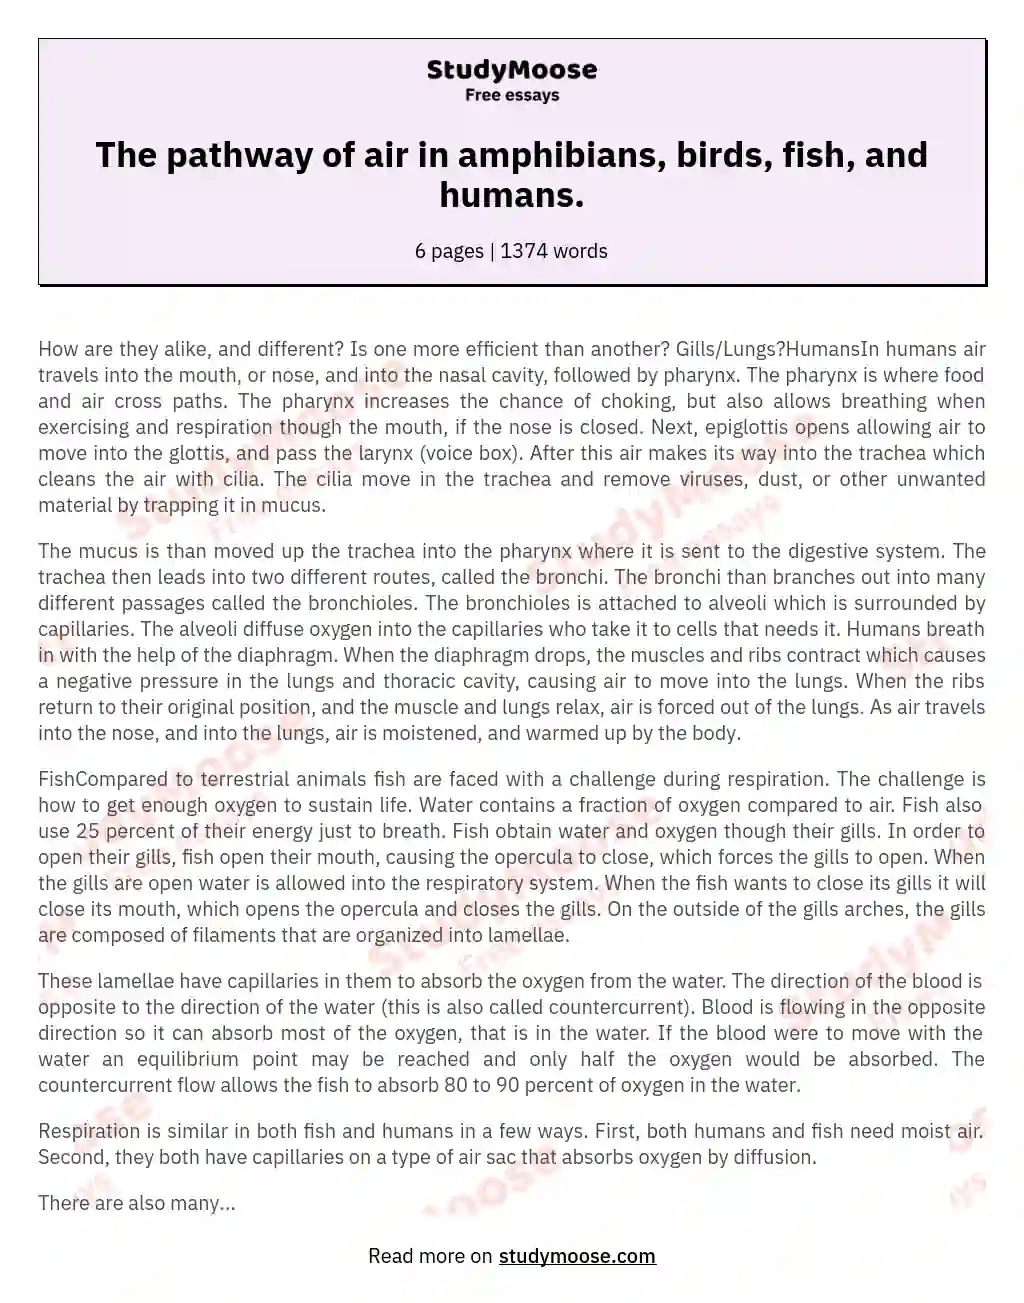 The pathway of air in amphibians, birds, fish, and humans.